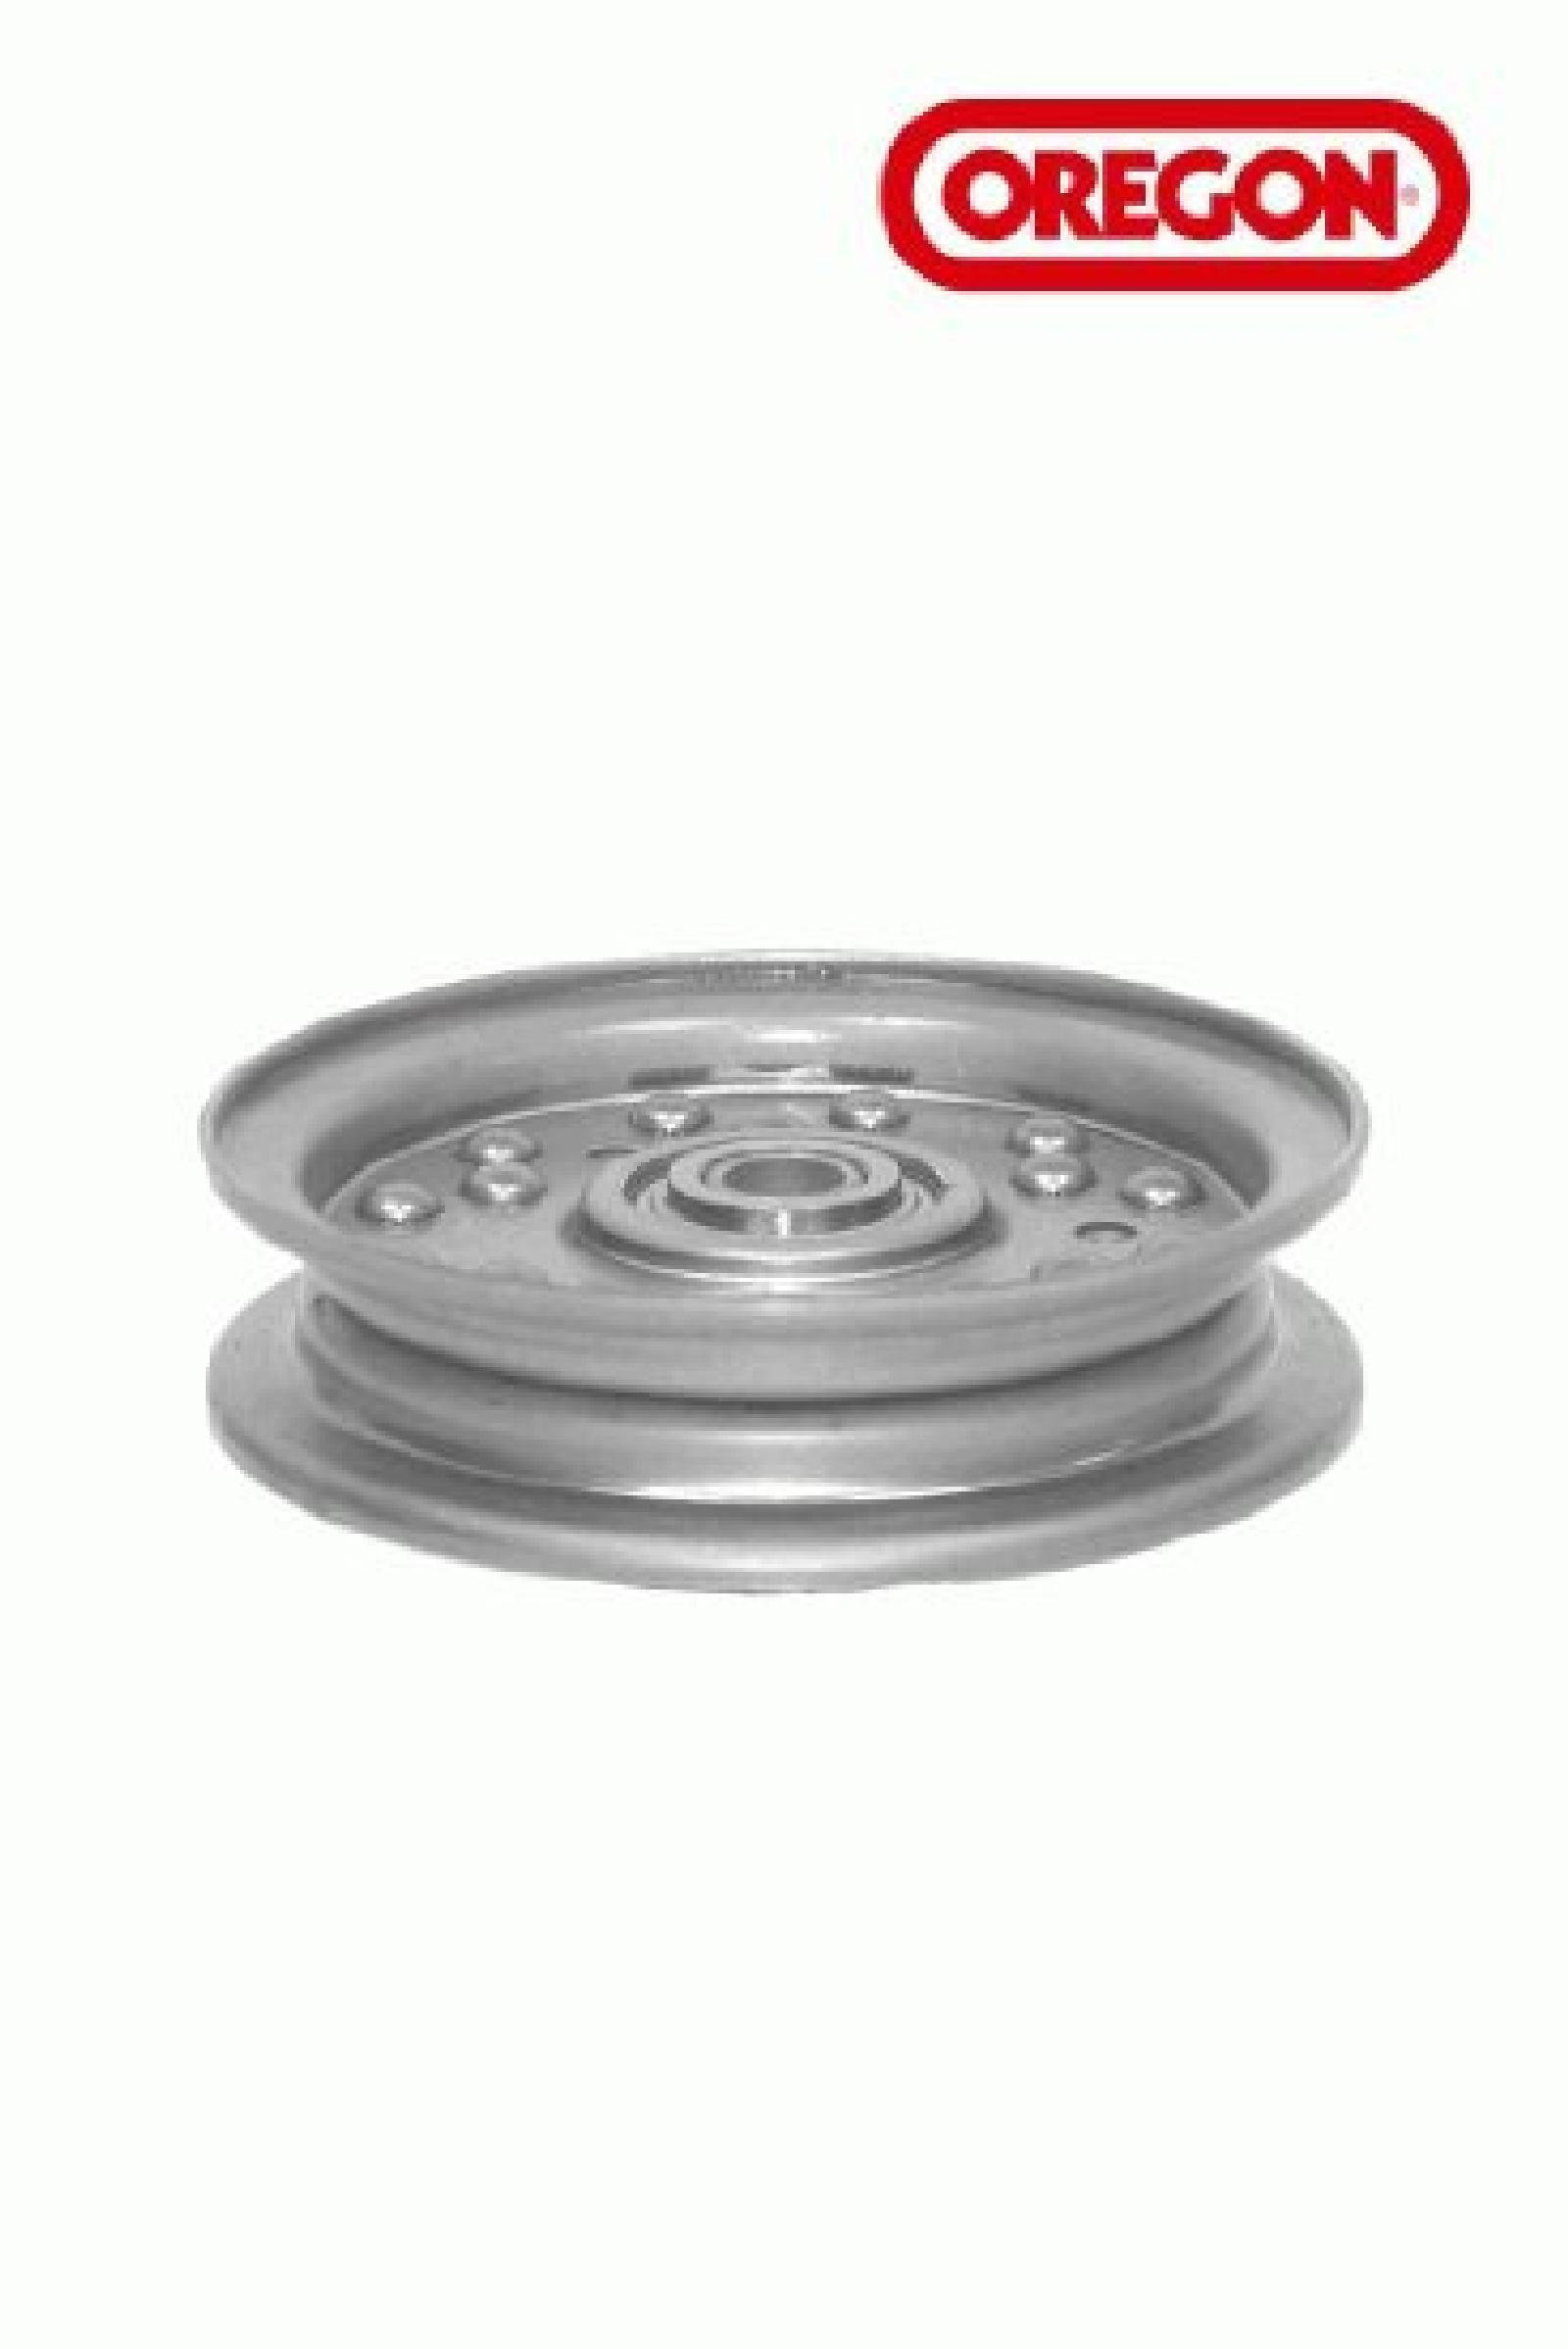 PULLEY, FLT IDLR DIXIE CH part# 78-009 by Oregon